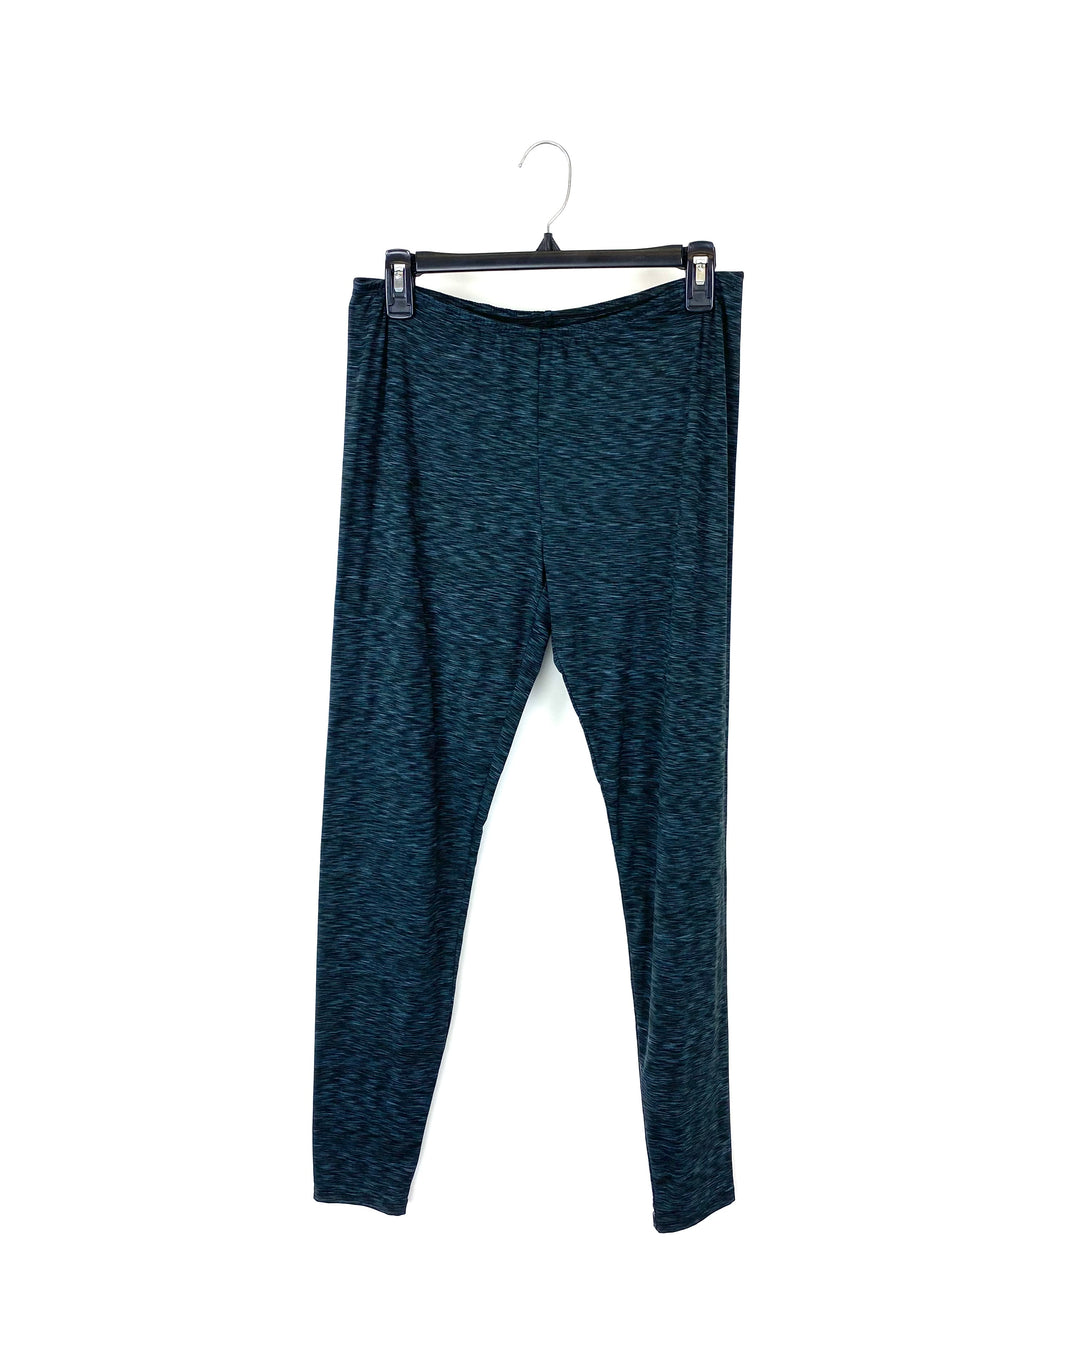 Black and Navy Heather Leggings - Size 10/12